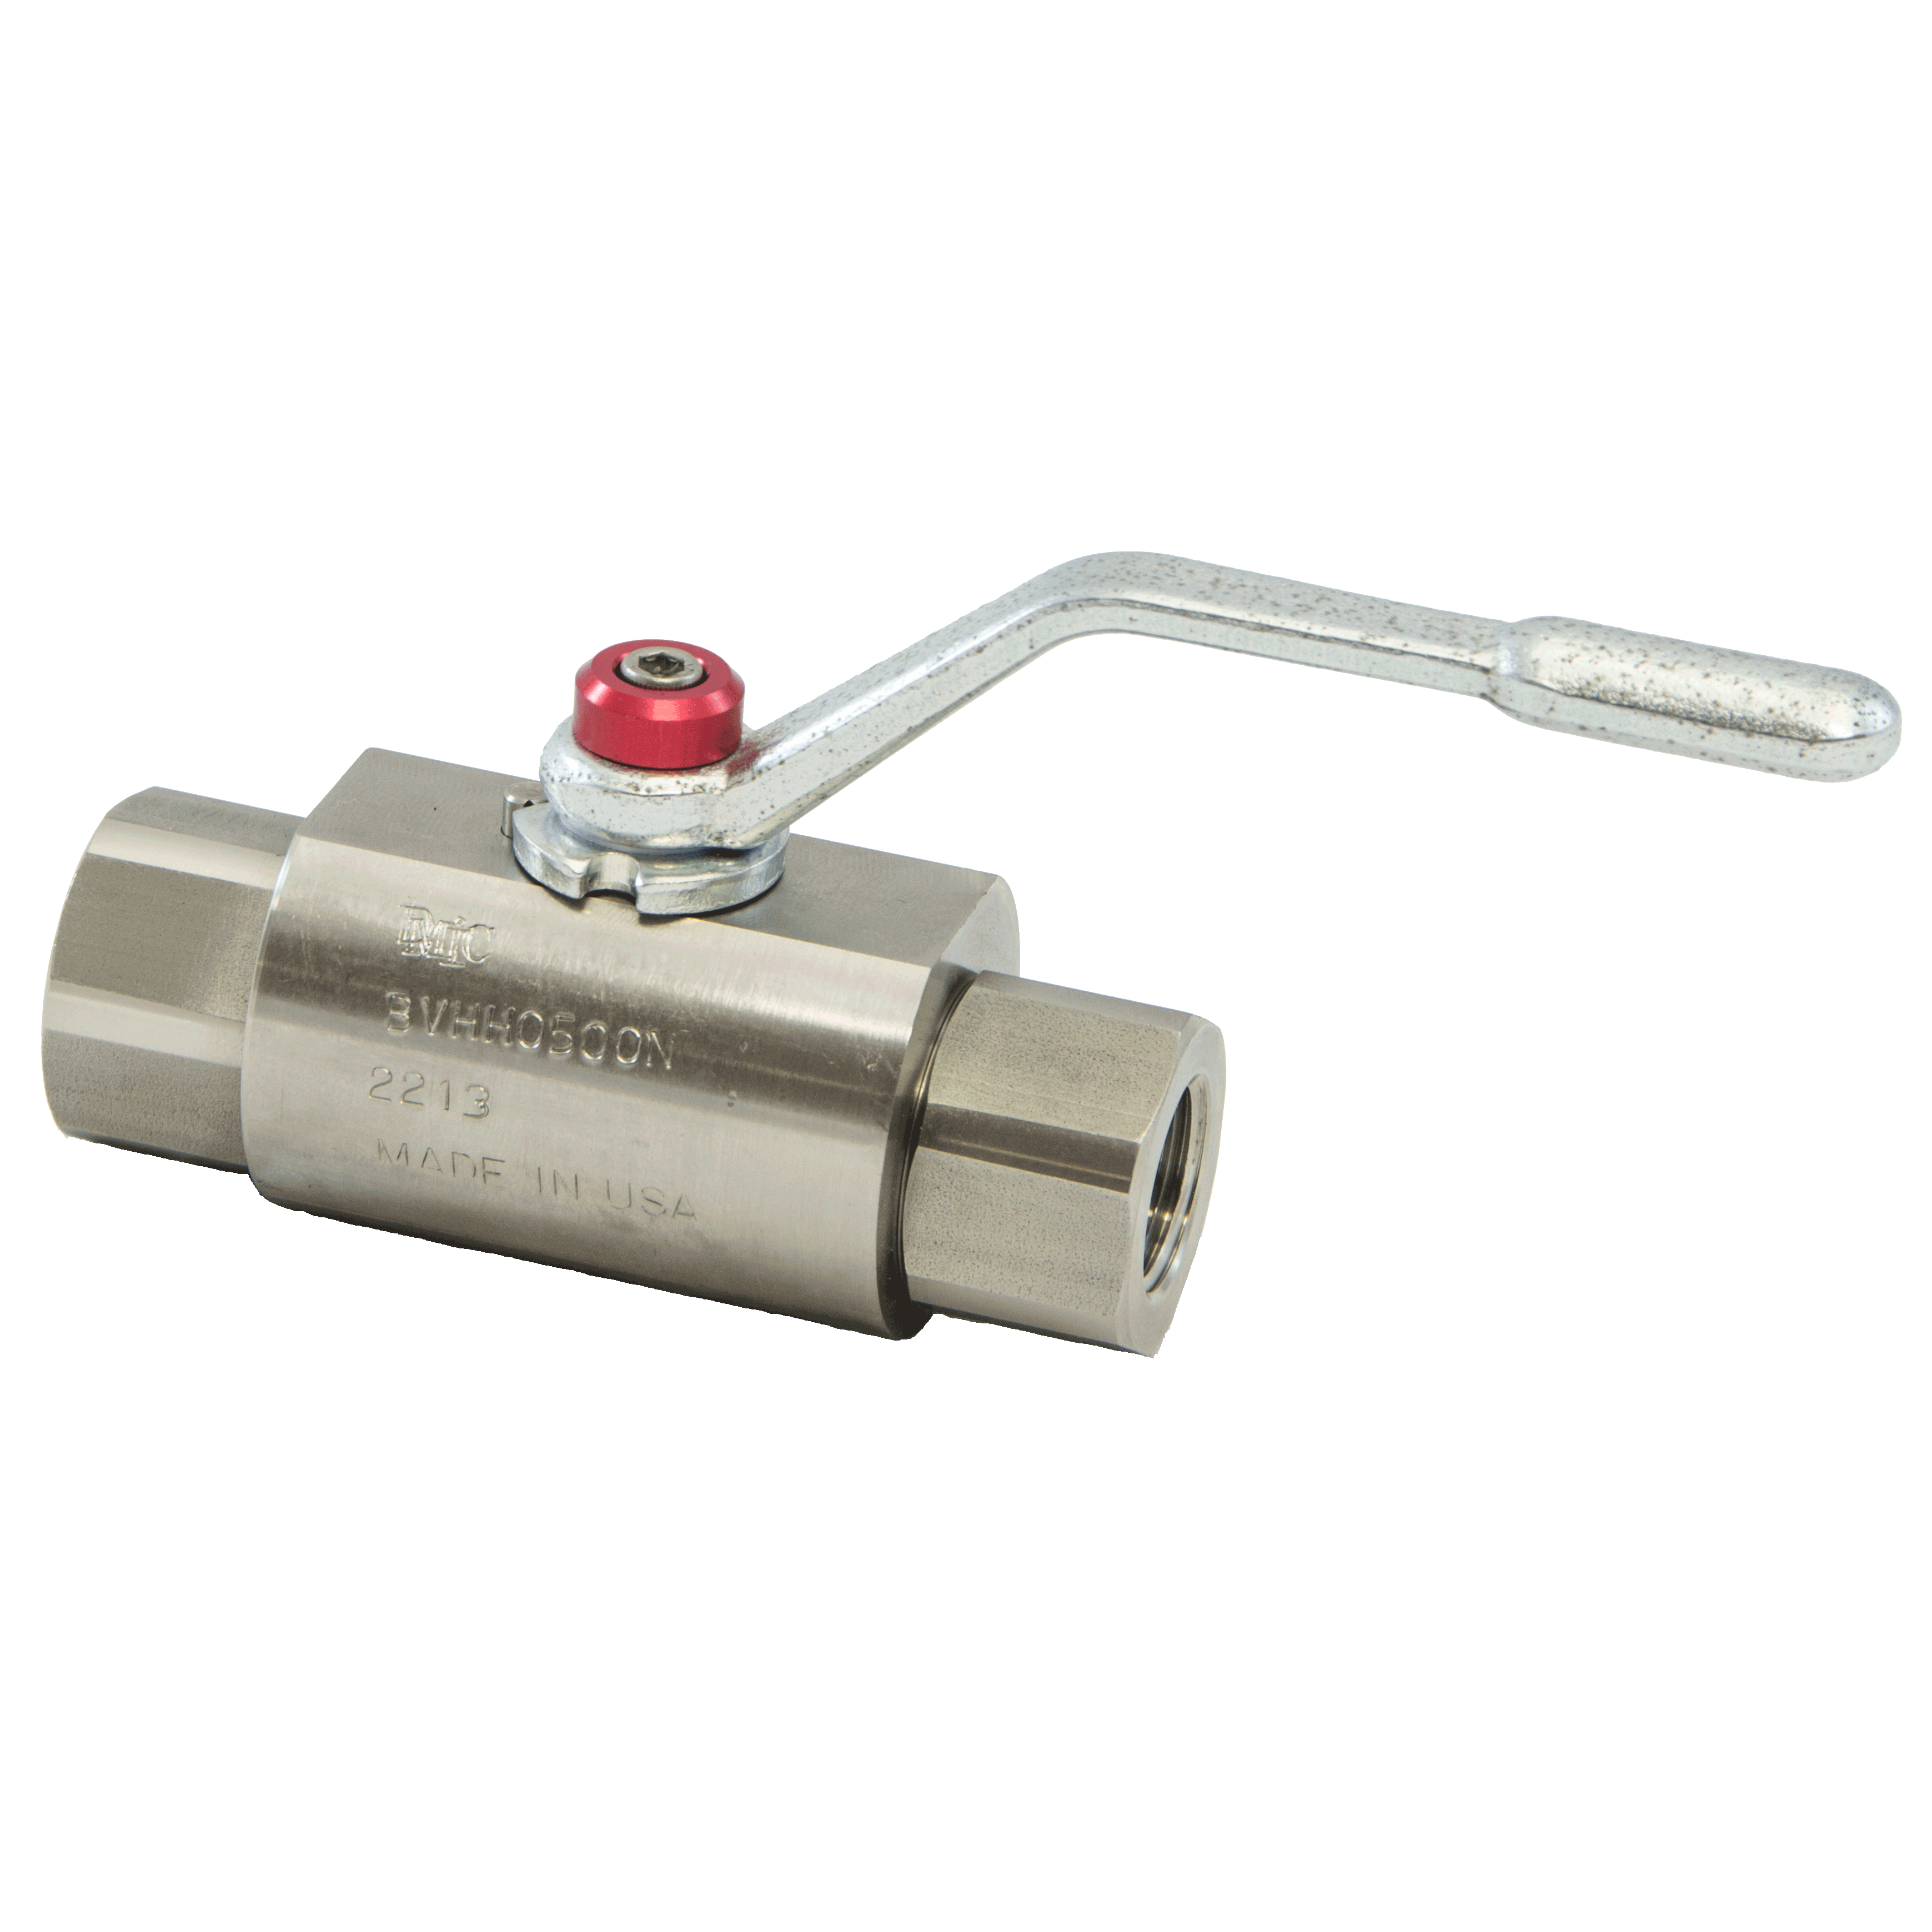 BVHH-2000N-2211 : DMIC Super High Pressure Ball Valve, 2 NPT, 316 Stainless Steel, 10000psi, Two-Way